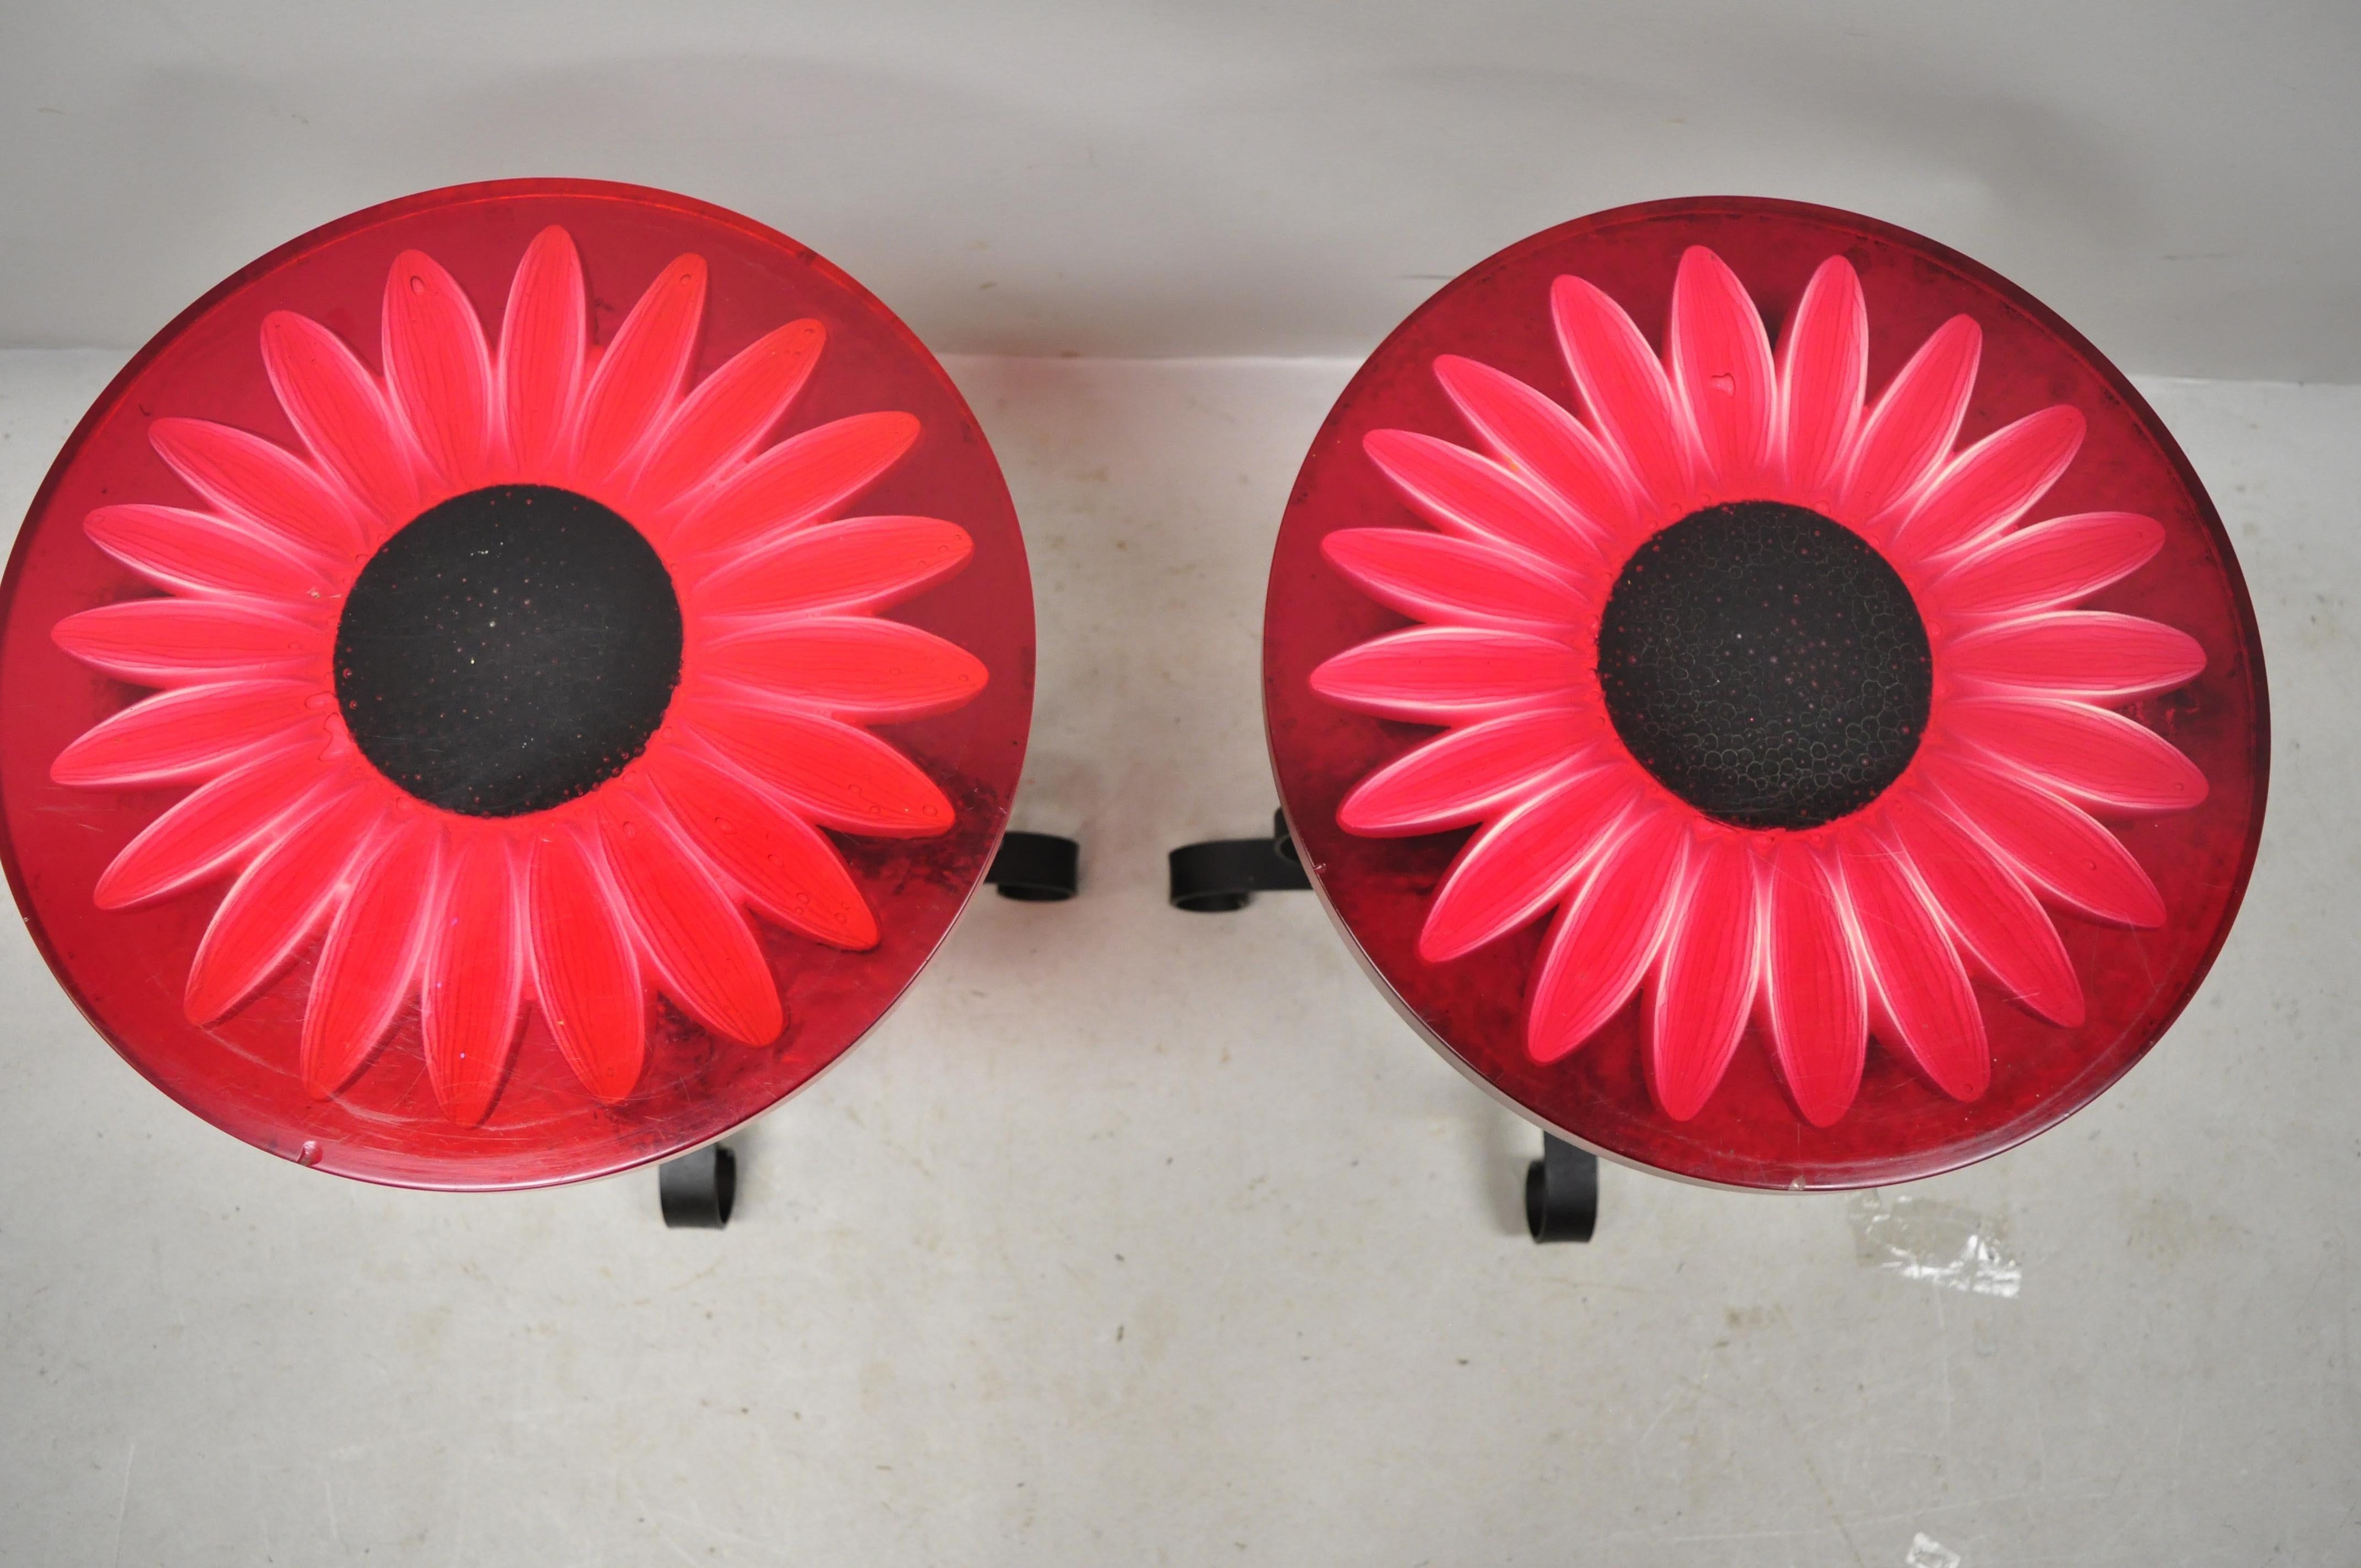 Vintage Wondermold Gamma Associates red resin sun flower iron side tables, pair. Item features red resin tops with encased flowers, wrought iron base, very nice vintage set, great style and form, circa mid-20th century. Measurements: 18.5